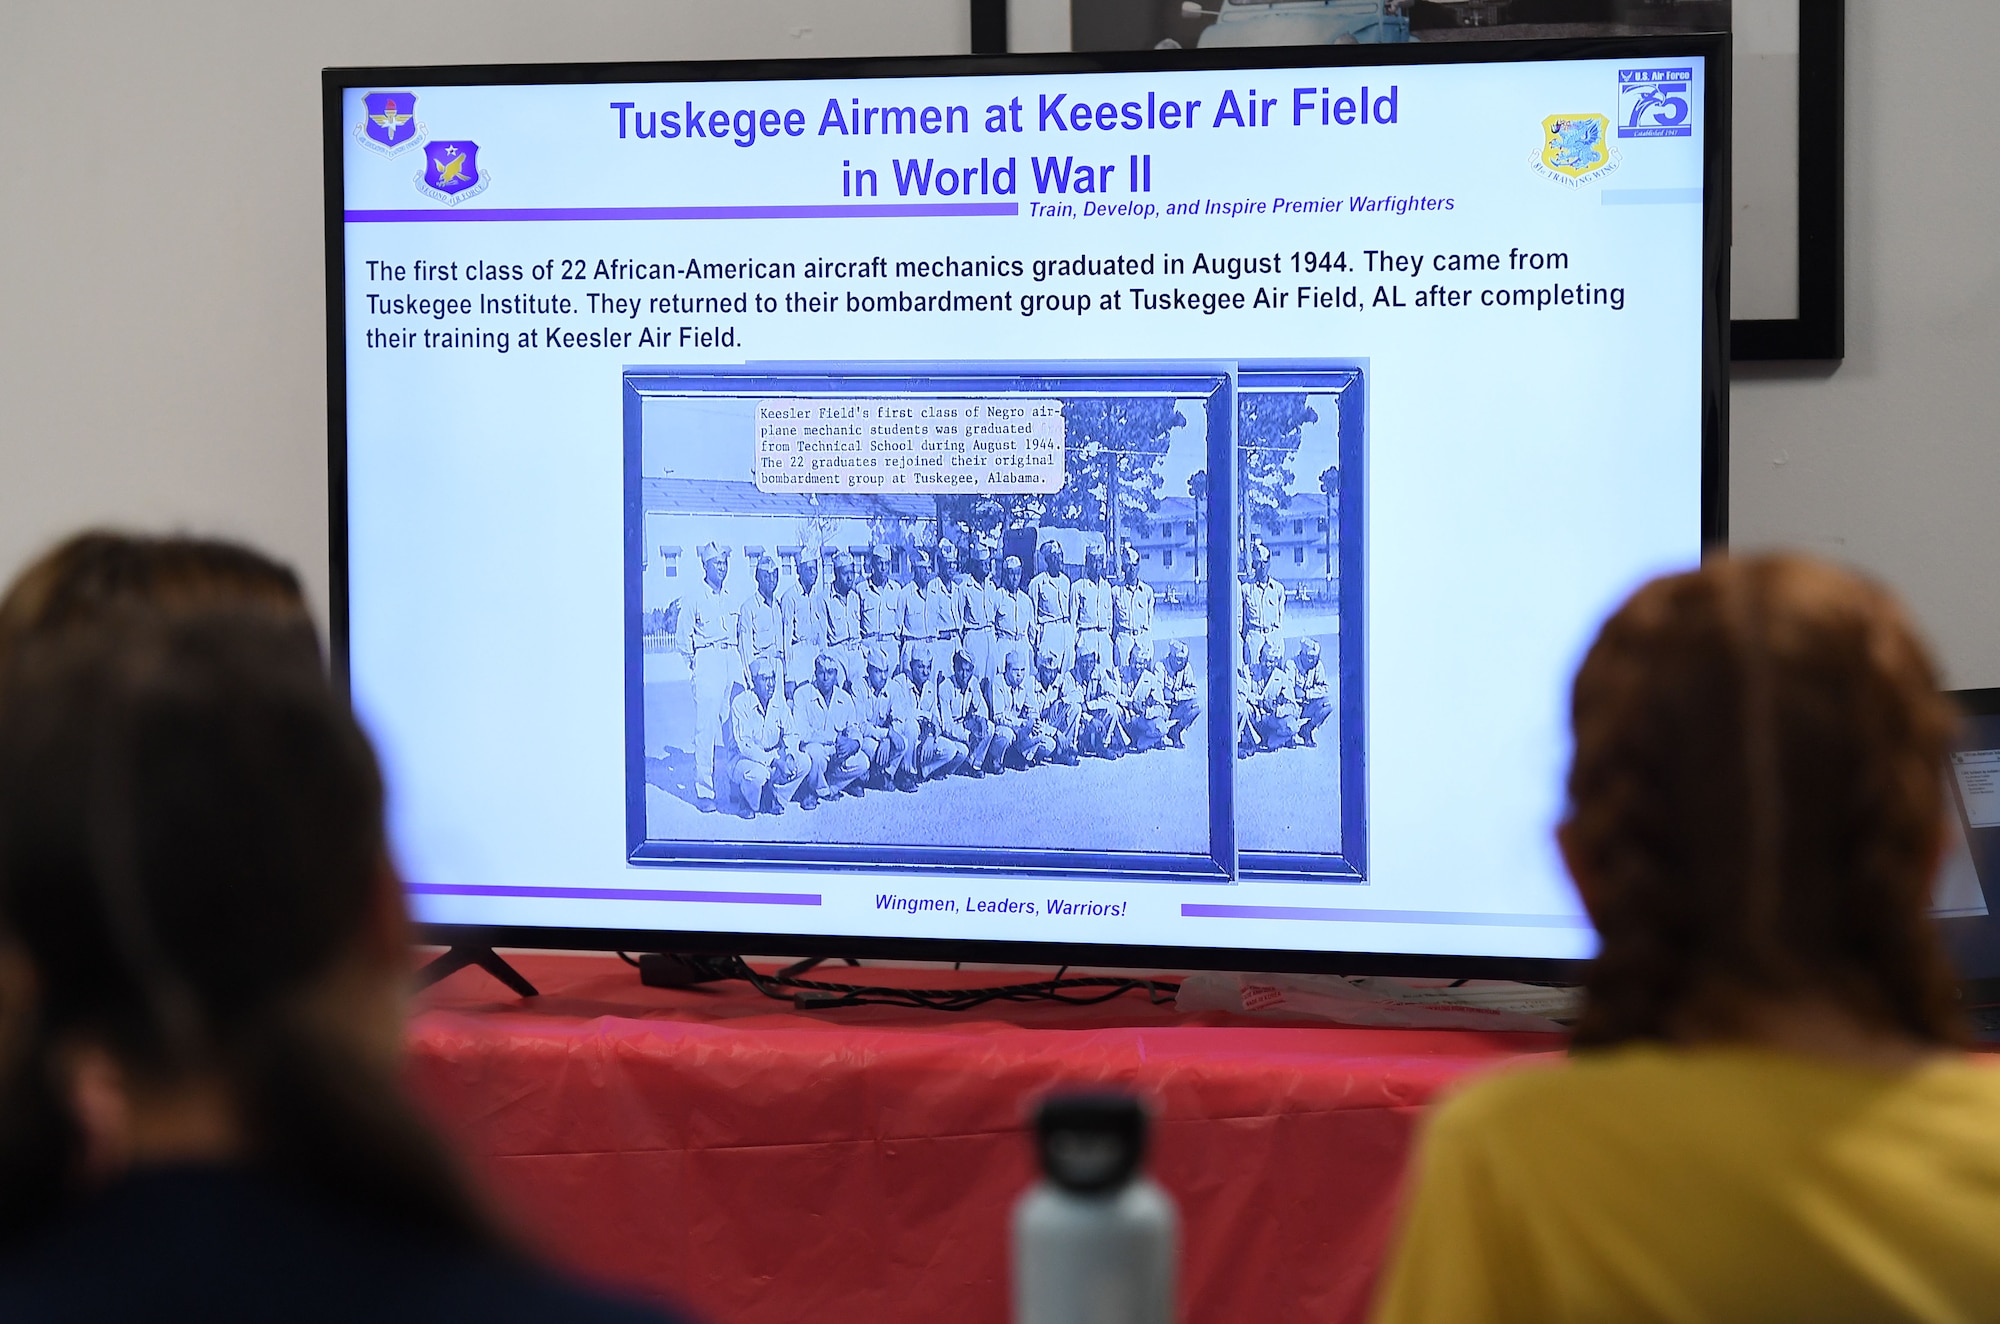 More than 15 school-aged children attend a briefing about the heritage of Keesler Air Force Base and the 81st Training Wing during a summer camp session inside the Mississippi Aviation Heritage Museum, Gulfport, Mississippi, June 27, 2022. Tyrone Scott, 81st TRW historian, delivered the briefing during the community outreach event. (U.S. Air Force photo by Kemberly Groue)